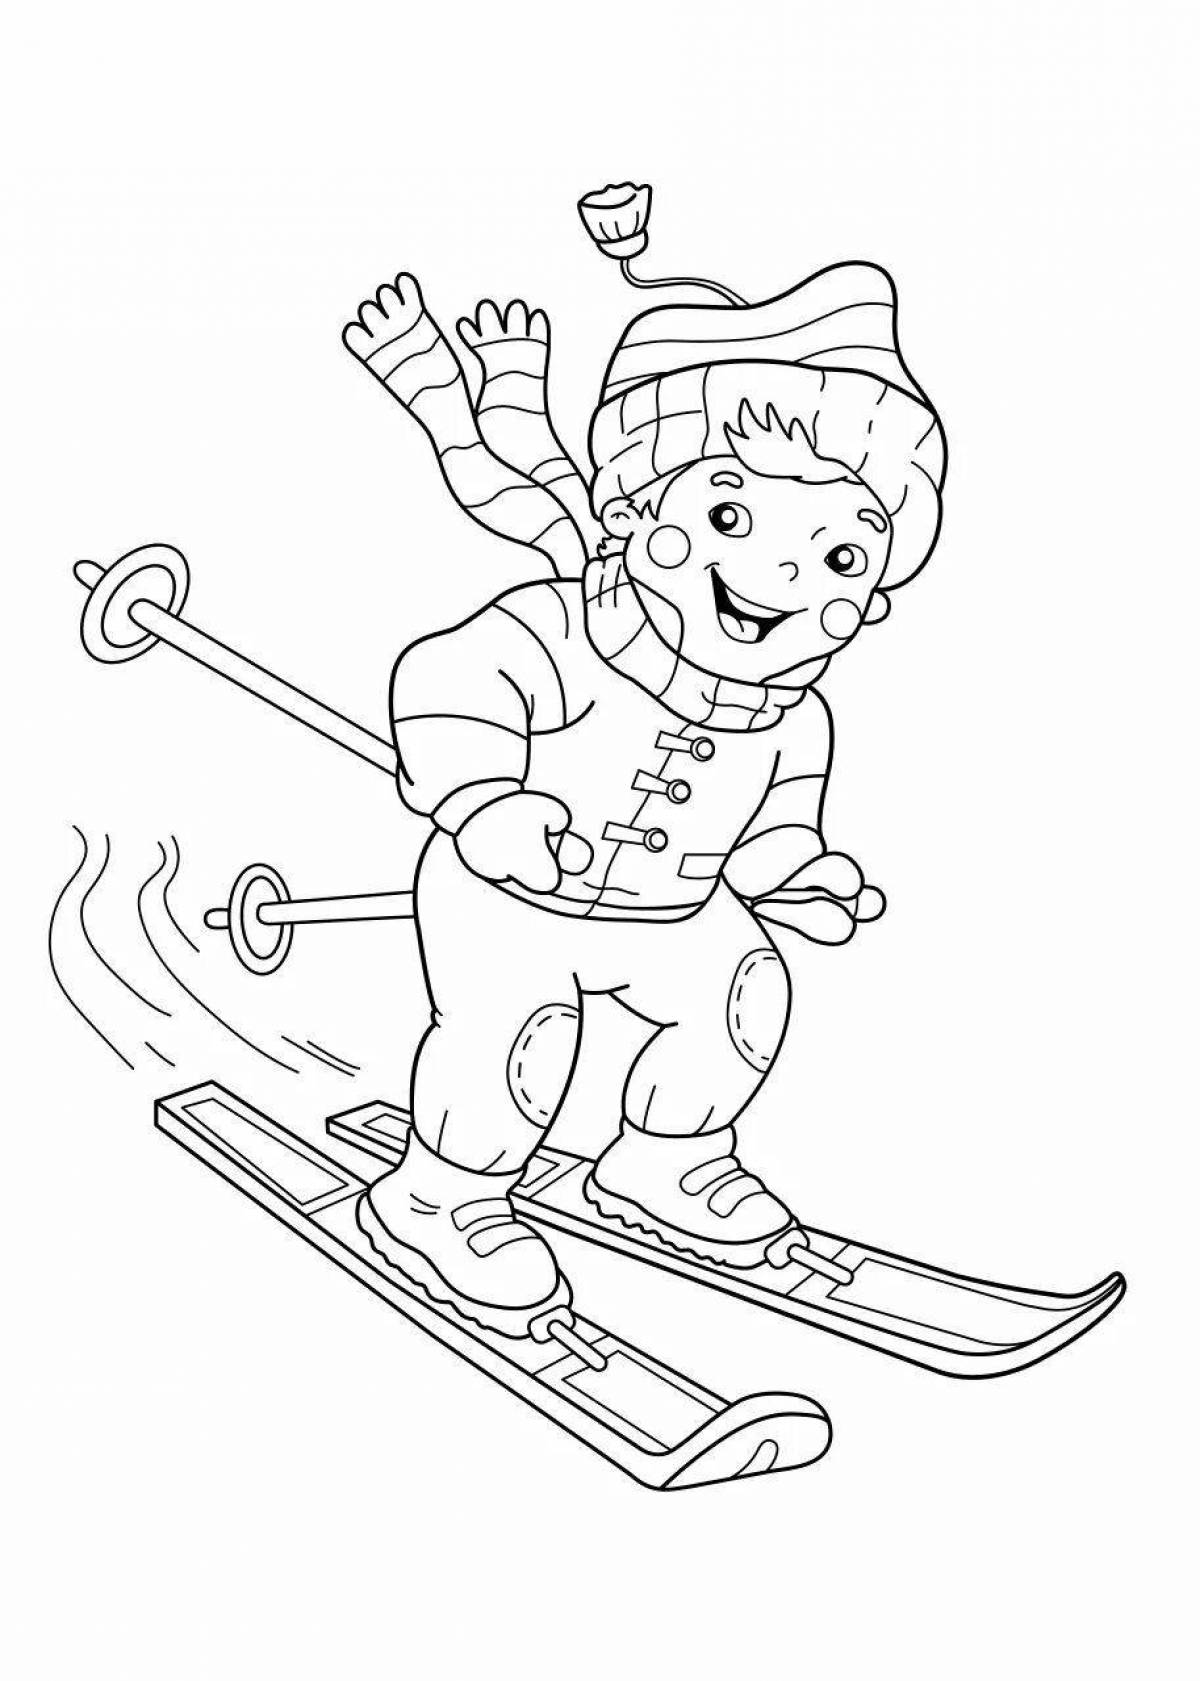 Spicy skier coloring book for 6-7 year olds